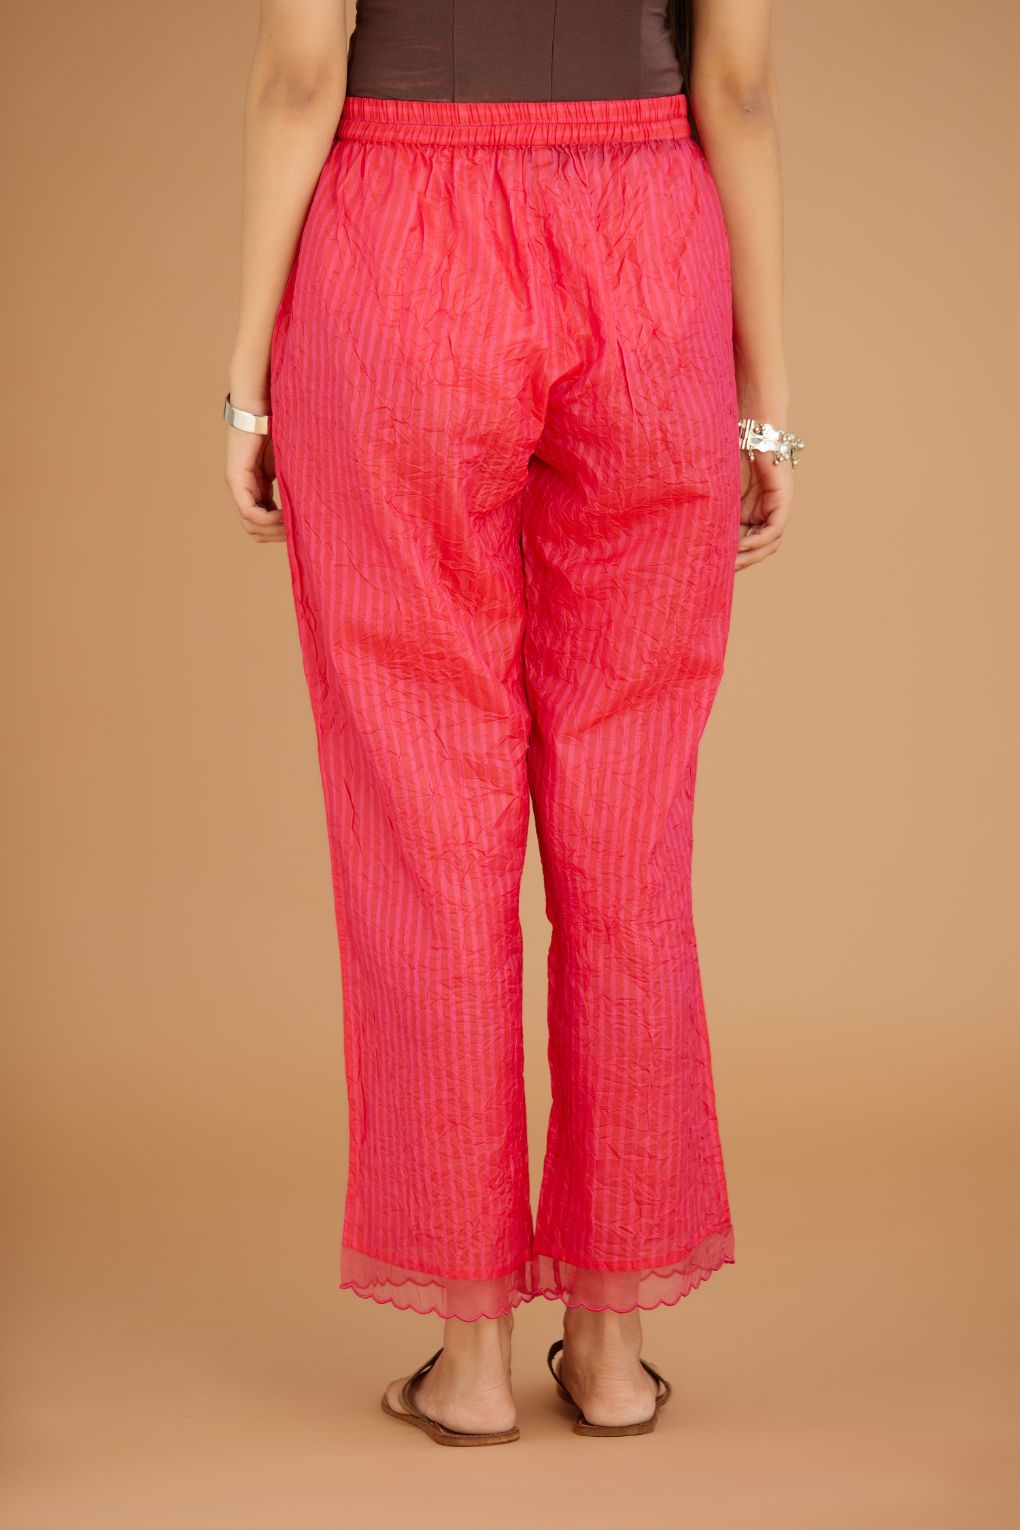 Fuchsia hand crushed silk pants with hand block print fine stripes and organza fabric and embroidery detail at bottom hem.